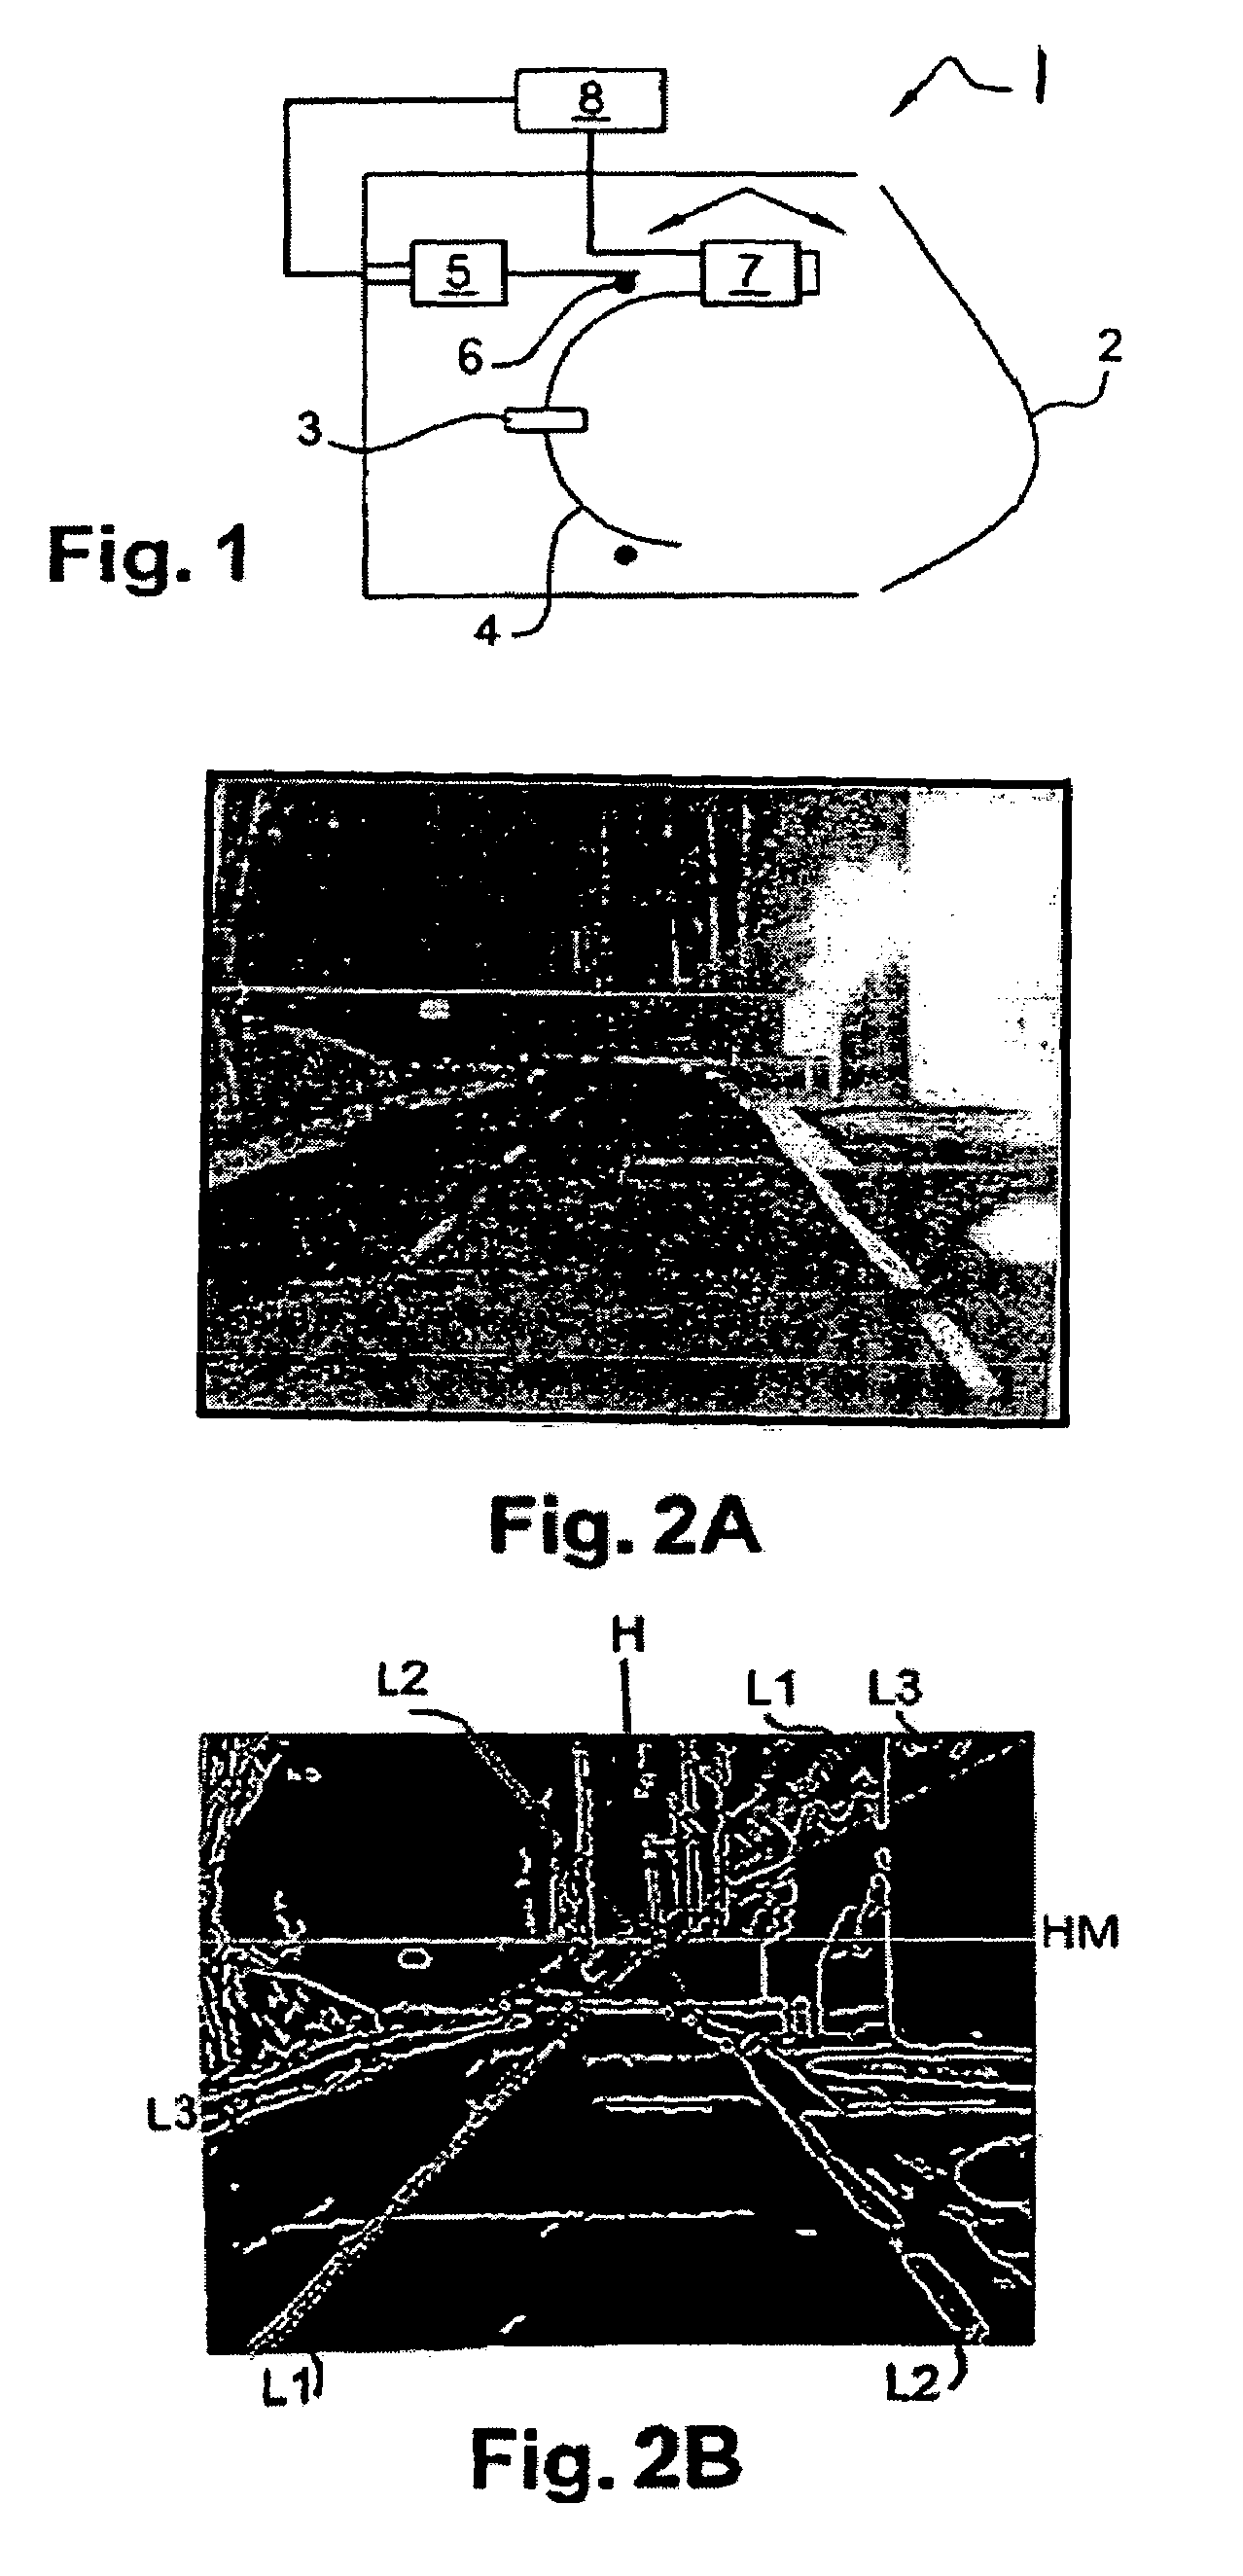 System for controlling the in situ orientation of a vehicle headlamp, and method of use